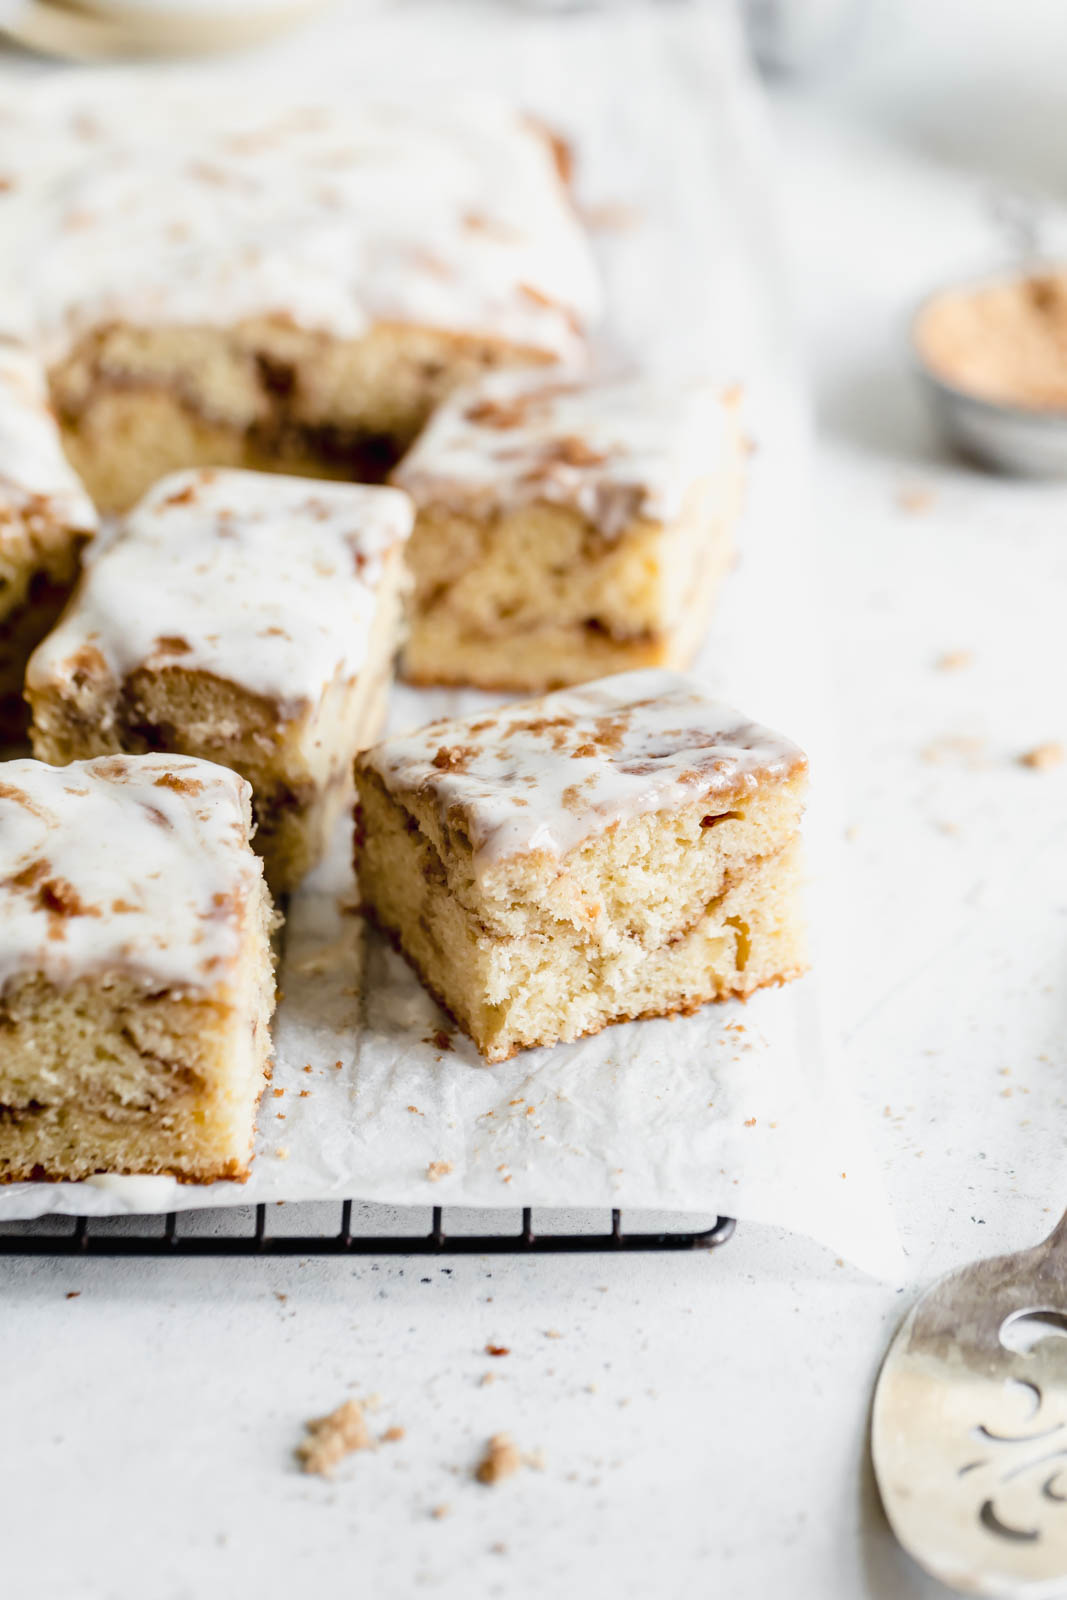 Buttery cinnamon roll cake swirled with ribbons of cinnamon and topped with a cream cheese glaze. All the decadence of a Cinnabon in half the time.